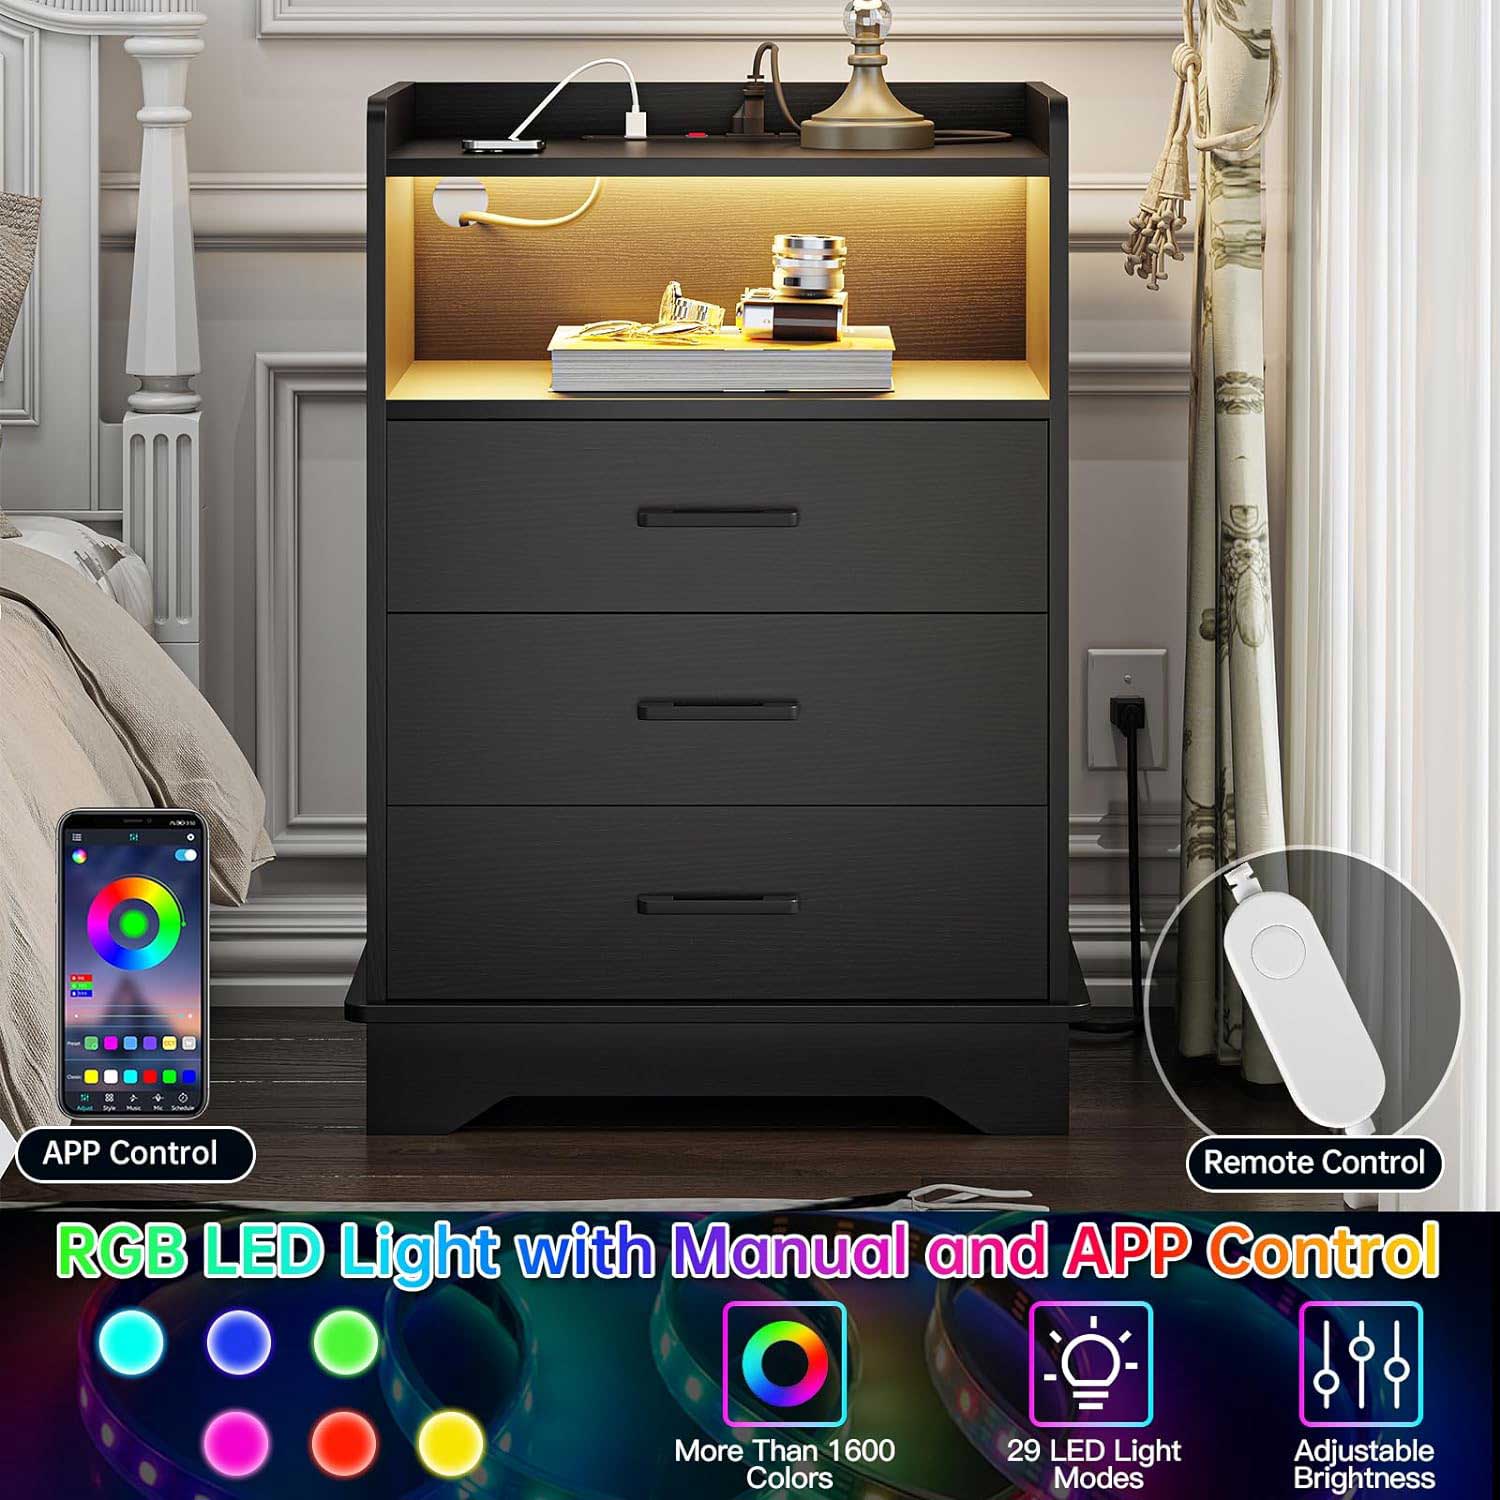 Sikaic LED Nightstand with Drawers and Open Storage Black